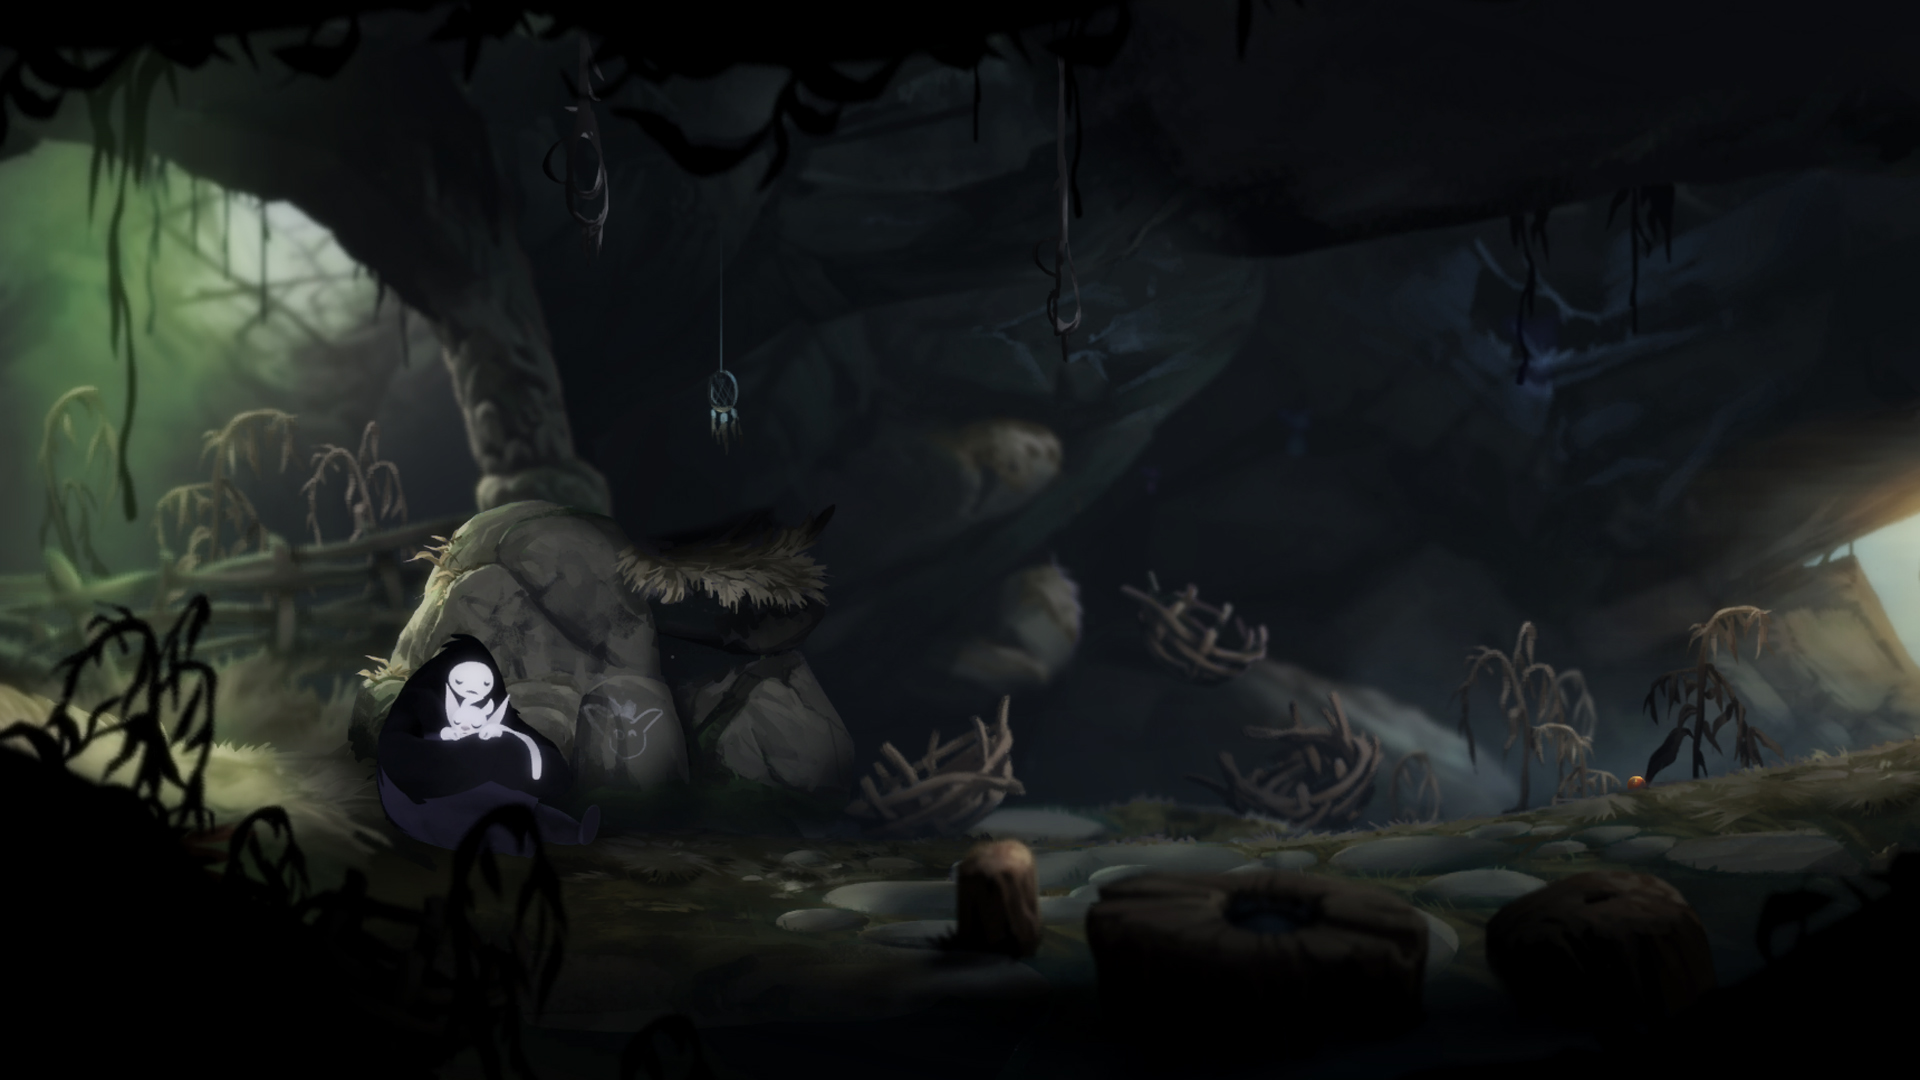 Ori And The Blind Forest: The Kotaku Review